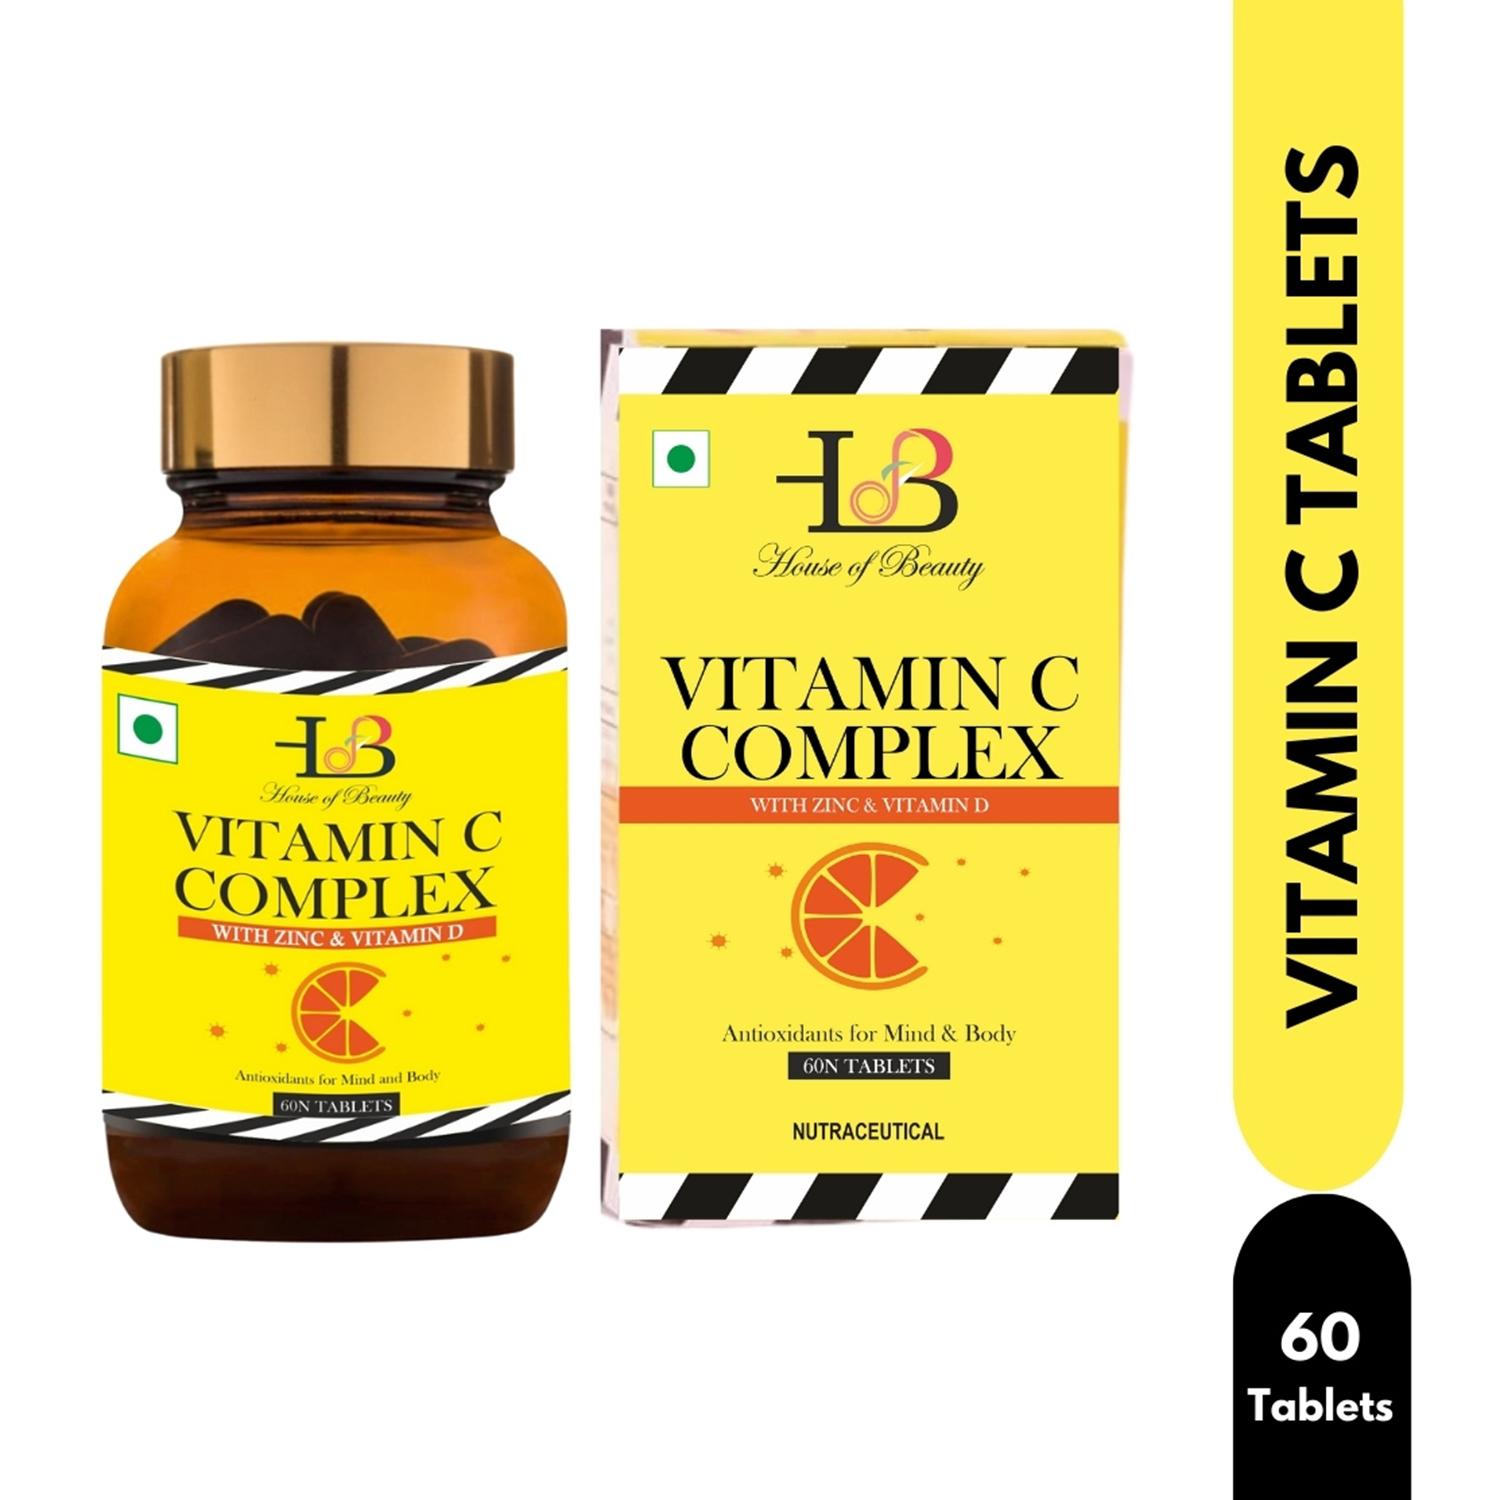 House of Beauty | House of Beauty Vitamin C Complex Tablets - (60 Pcs)